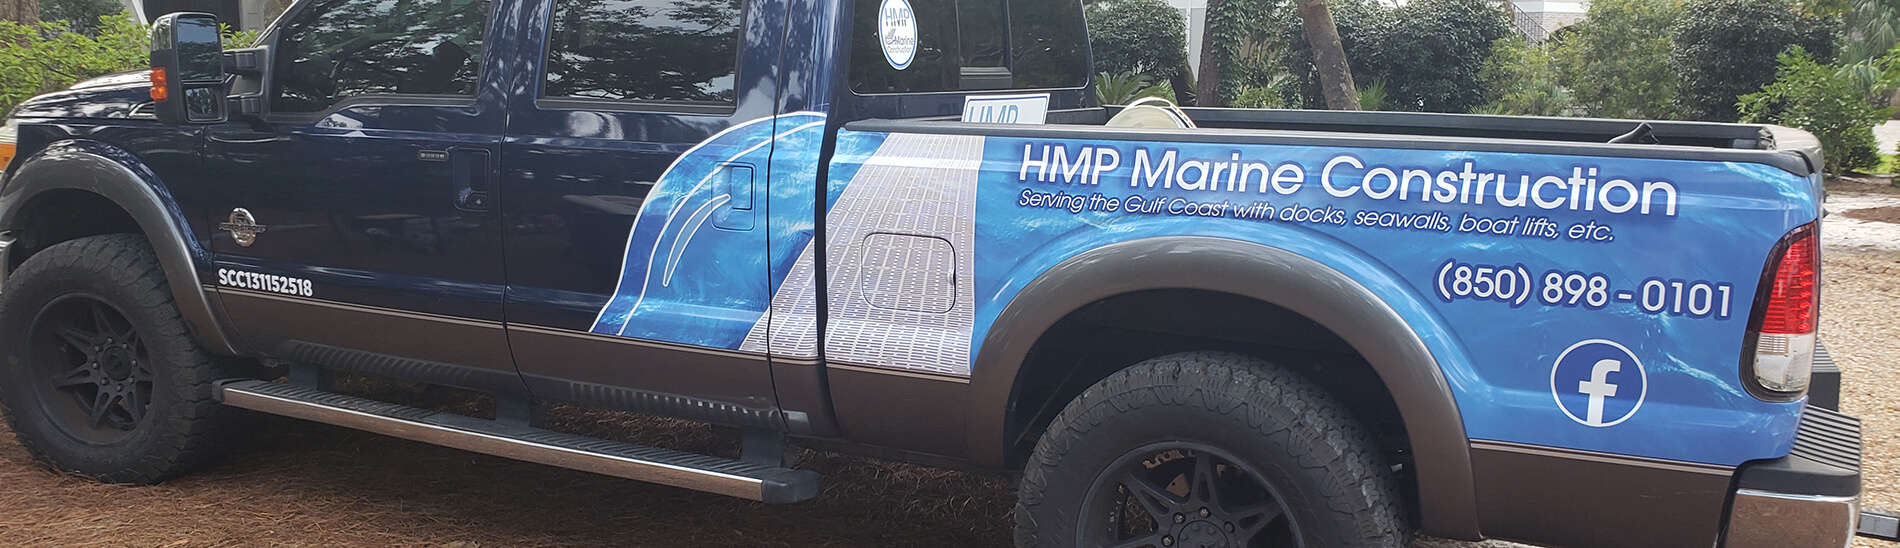 HMP Marine Construction in the field